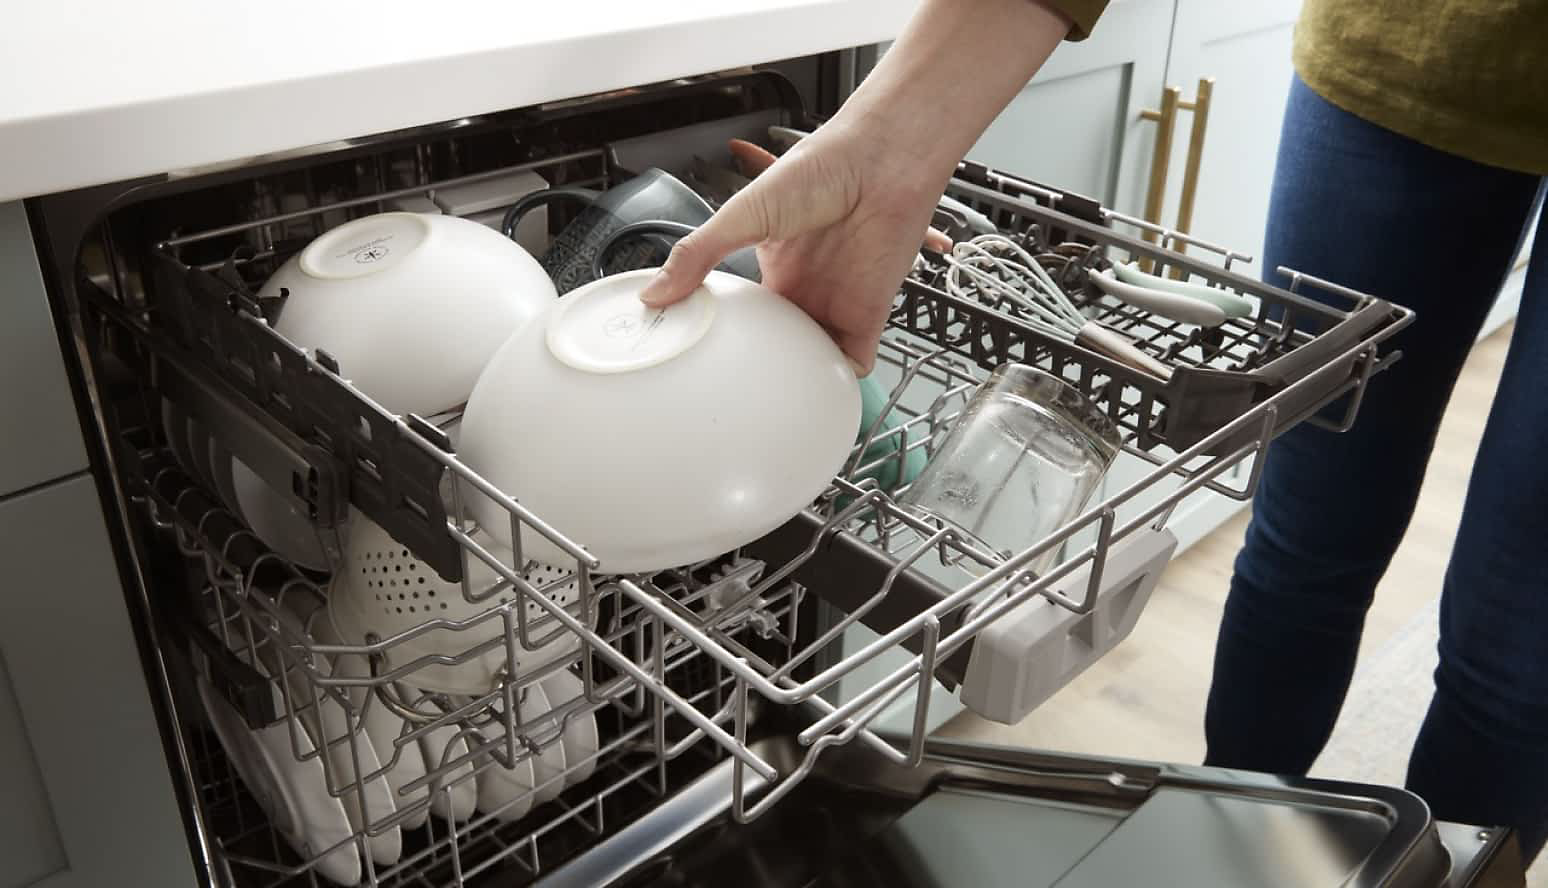 A person placing a white bowl in the 3rd Rack of a Whirlpool® Dishwasher